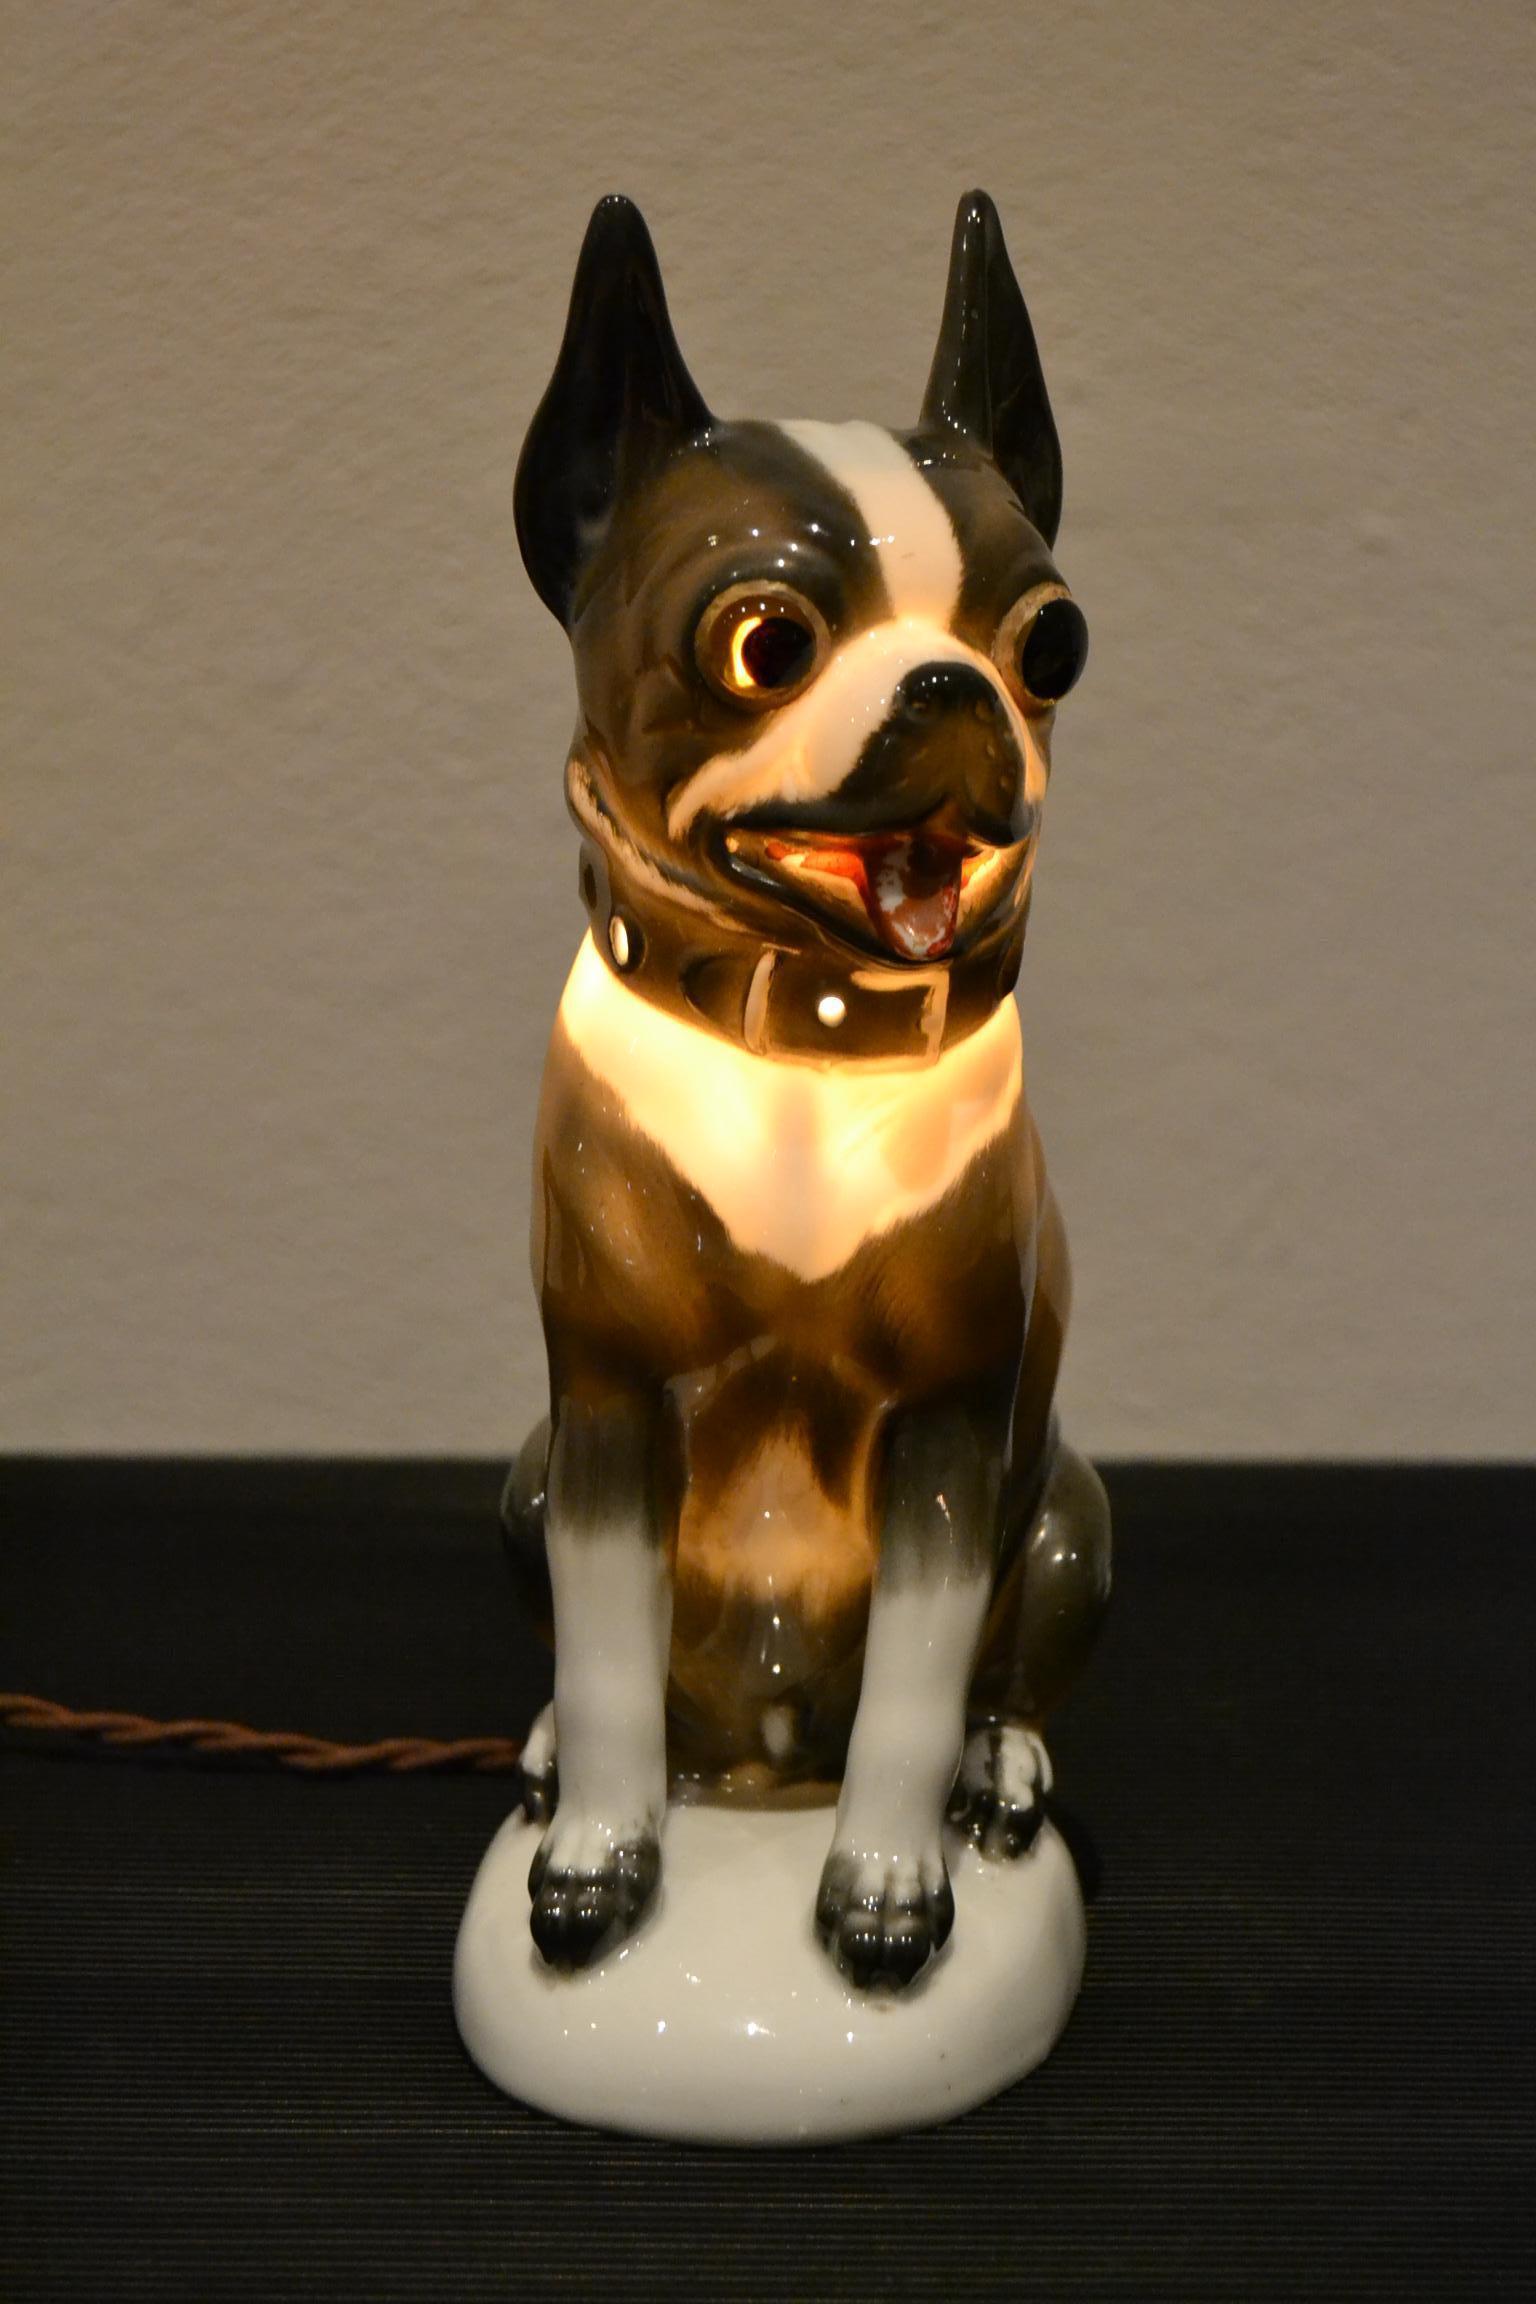 Great looking Frenchie - Boston terrier perfume lamp.
This large figural perfume light dates from the 1930s.
Art Deco porcelain animal light - table lamp in the shape of a cute looking dog statue:
A French bulldog - Boston Terrier with big glass